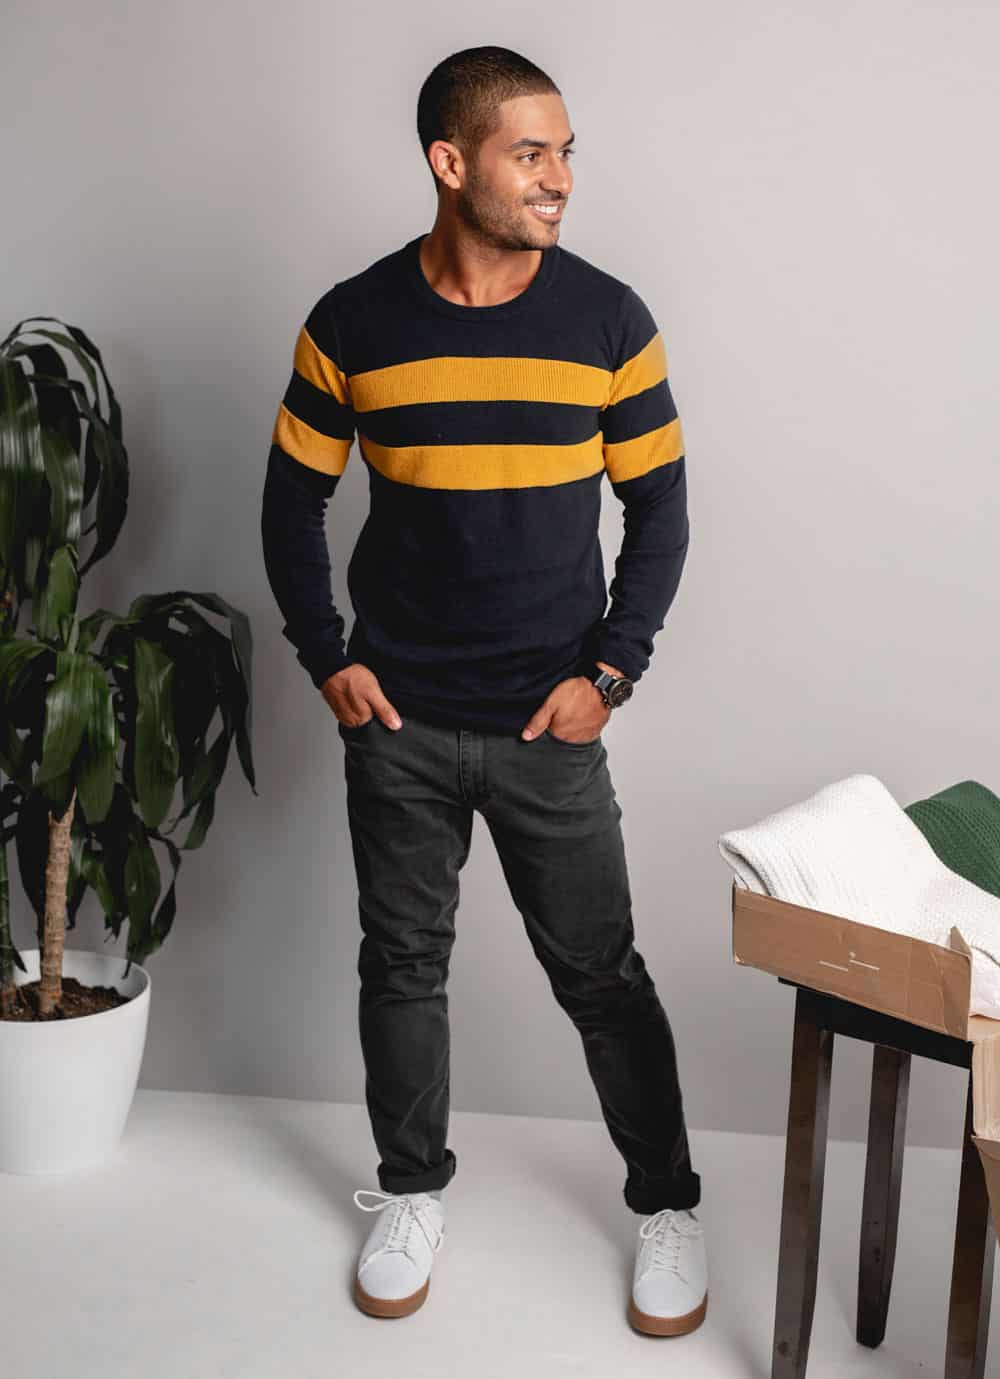 Man wearing Frank and Oak clothing